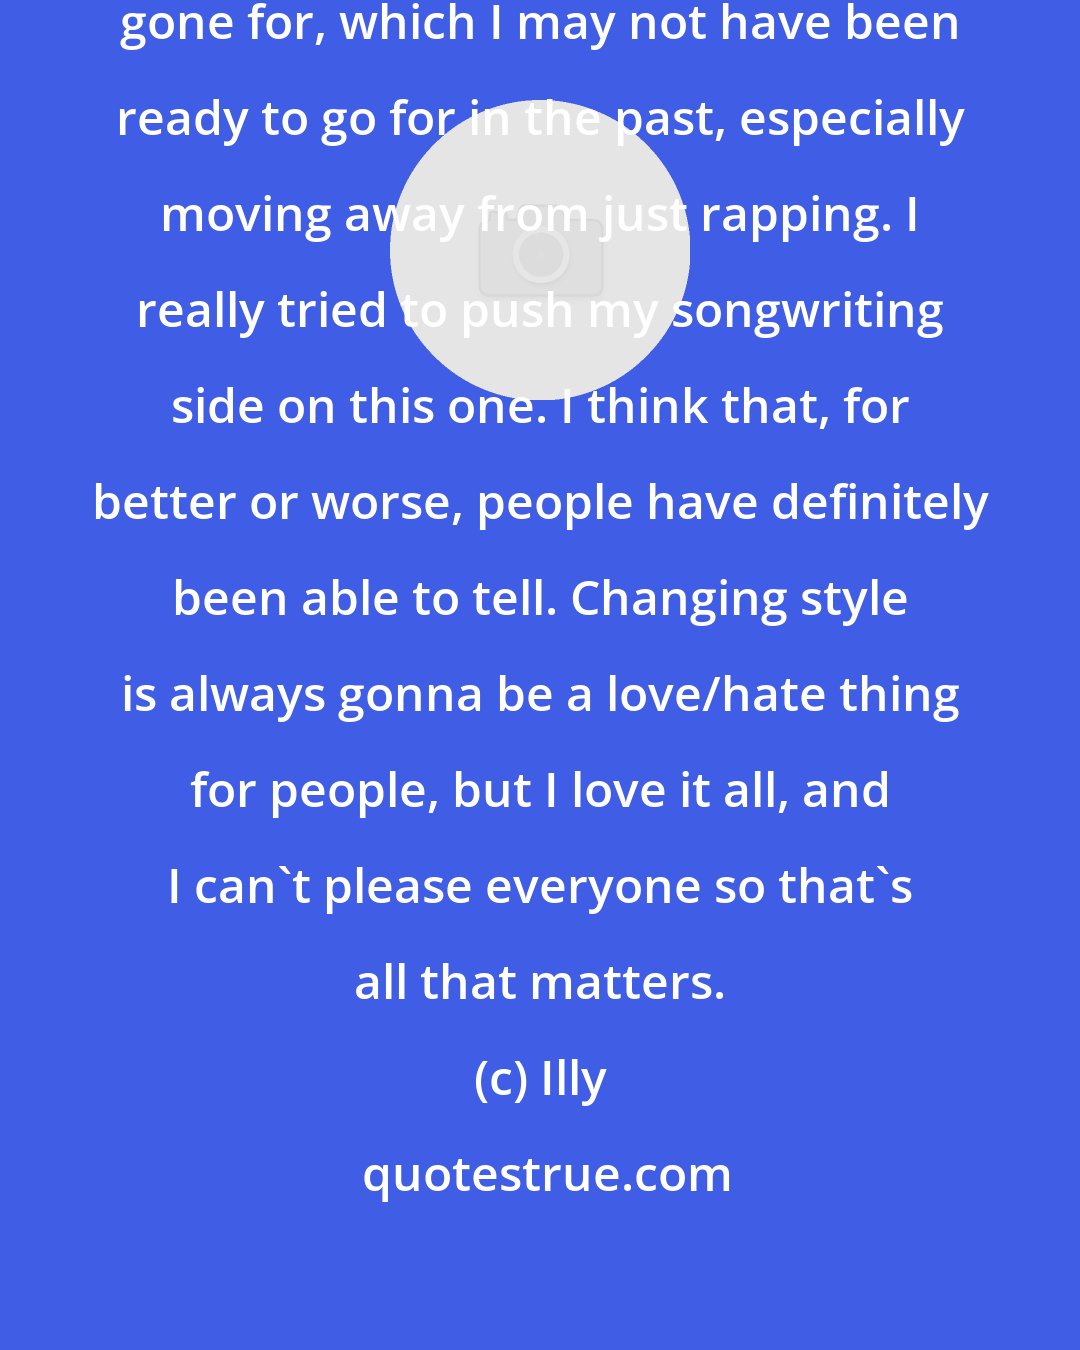 Illy: There are a lot of new sounds I've gone for, which I may not have been ready to go for in the past, especially moving away from just rapping. I really tried to push my songwriting side on this one. I think that, for better or worse, people have definitely been able to tell. Changing style is always gonna be a love/hate thing for people, but I love it all, and I can't please everyone so that's all that matters.